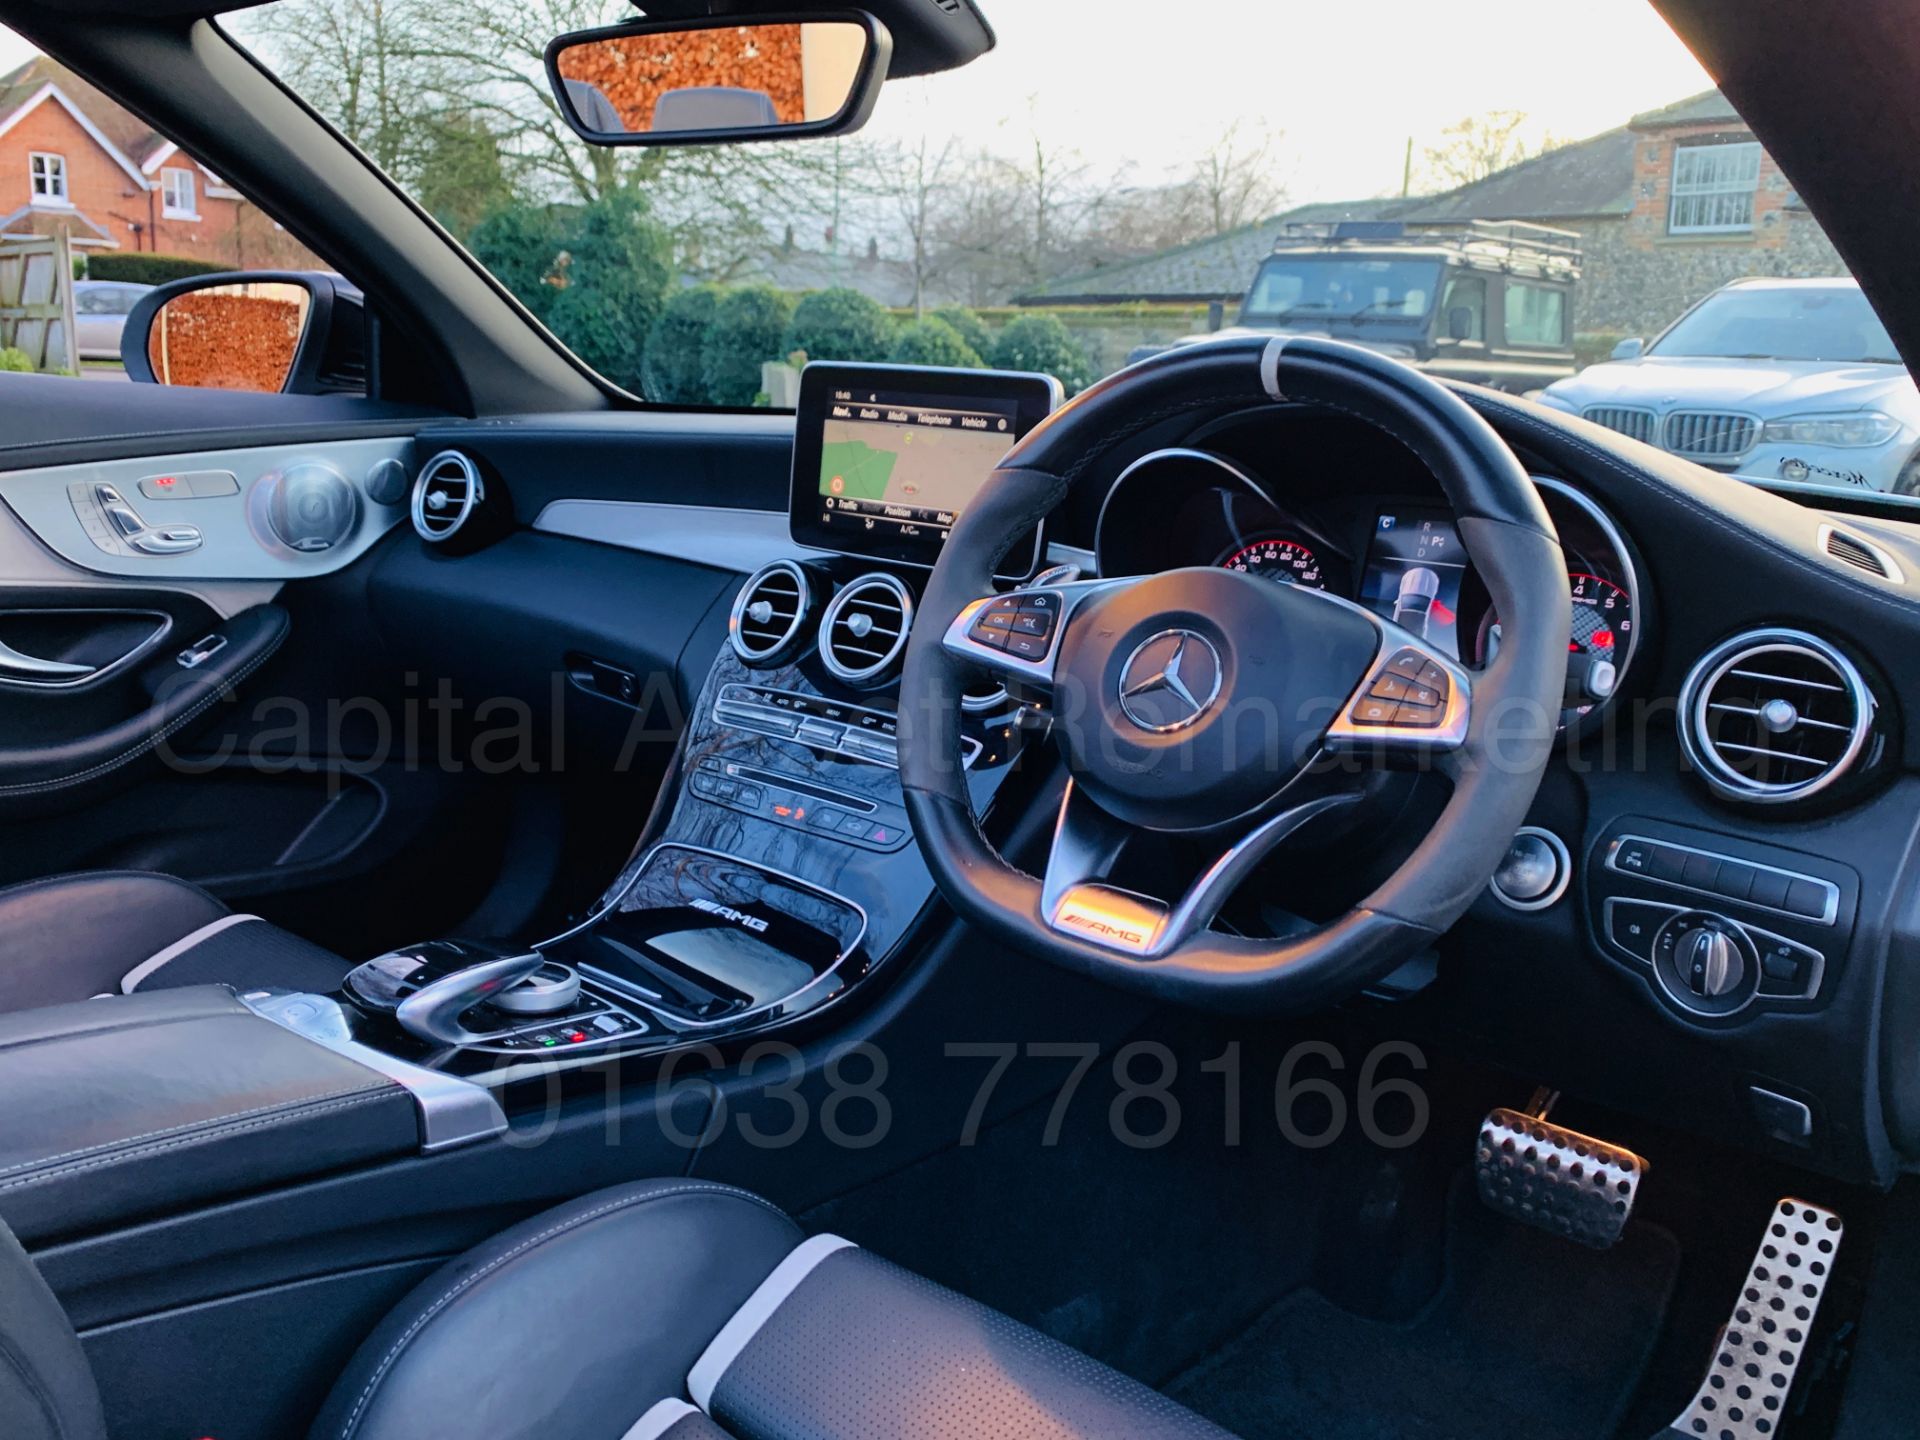 (On Sale) MERCEDES-BENZ AMG C63-S *CABRIOLET* (67 REG) '4.0 BI-TURBO -510 BHP - AUTO' *FULLY LOADED* - Image 63 of 79